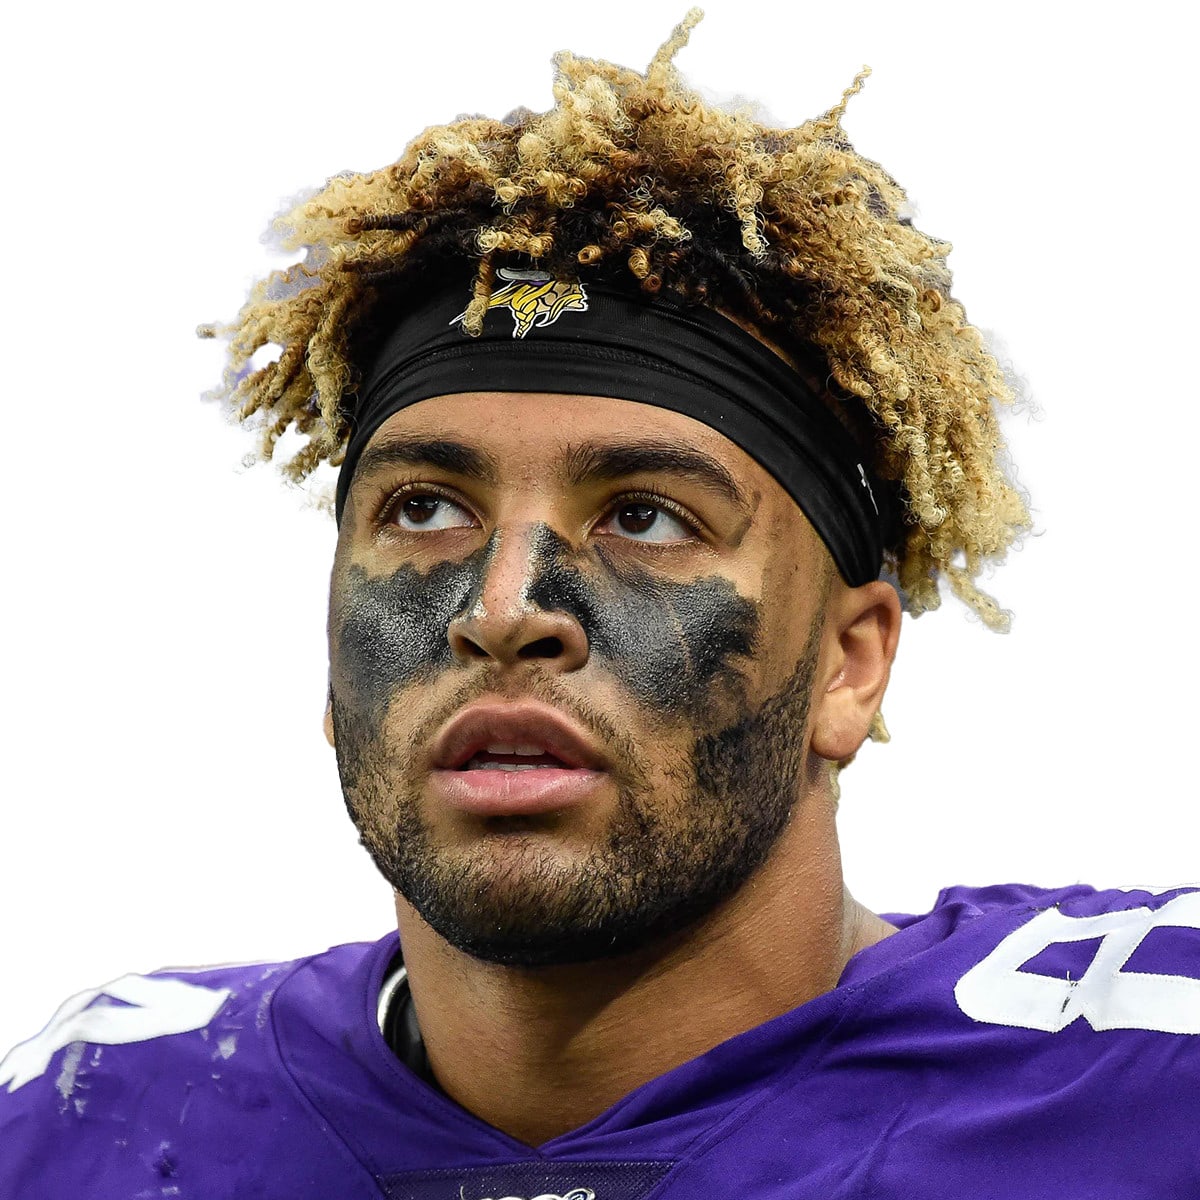 Irv Smith Jr. injury update: Vikings TE expected to be available